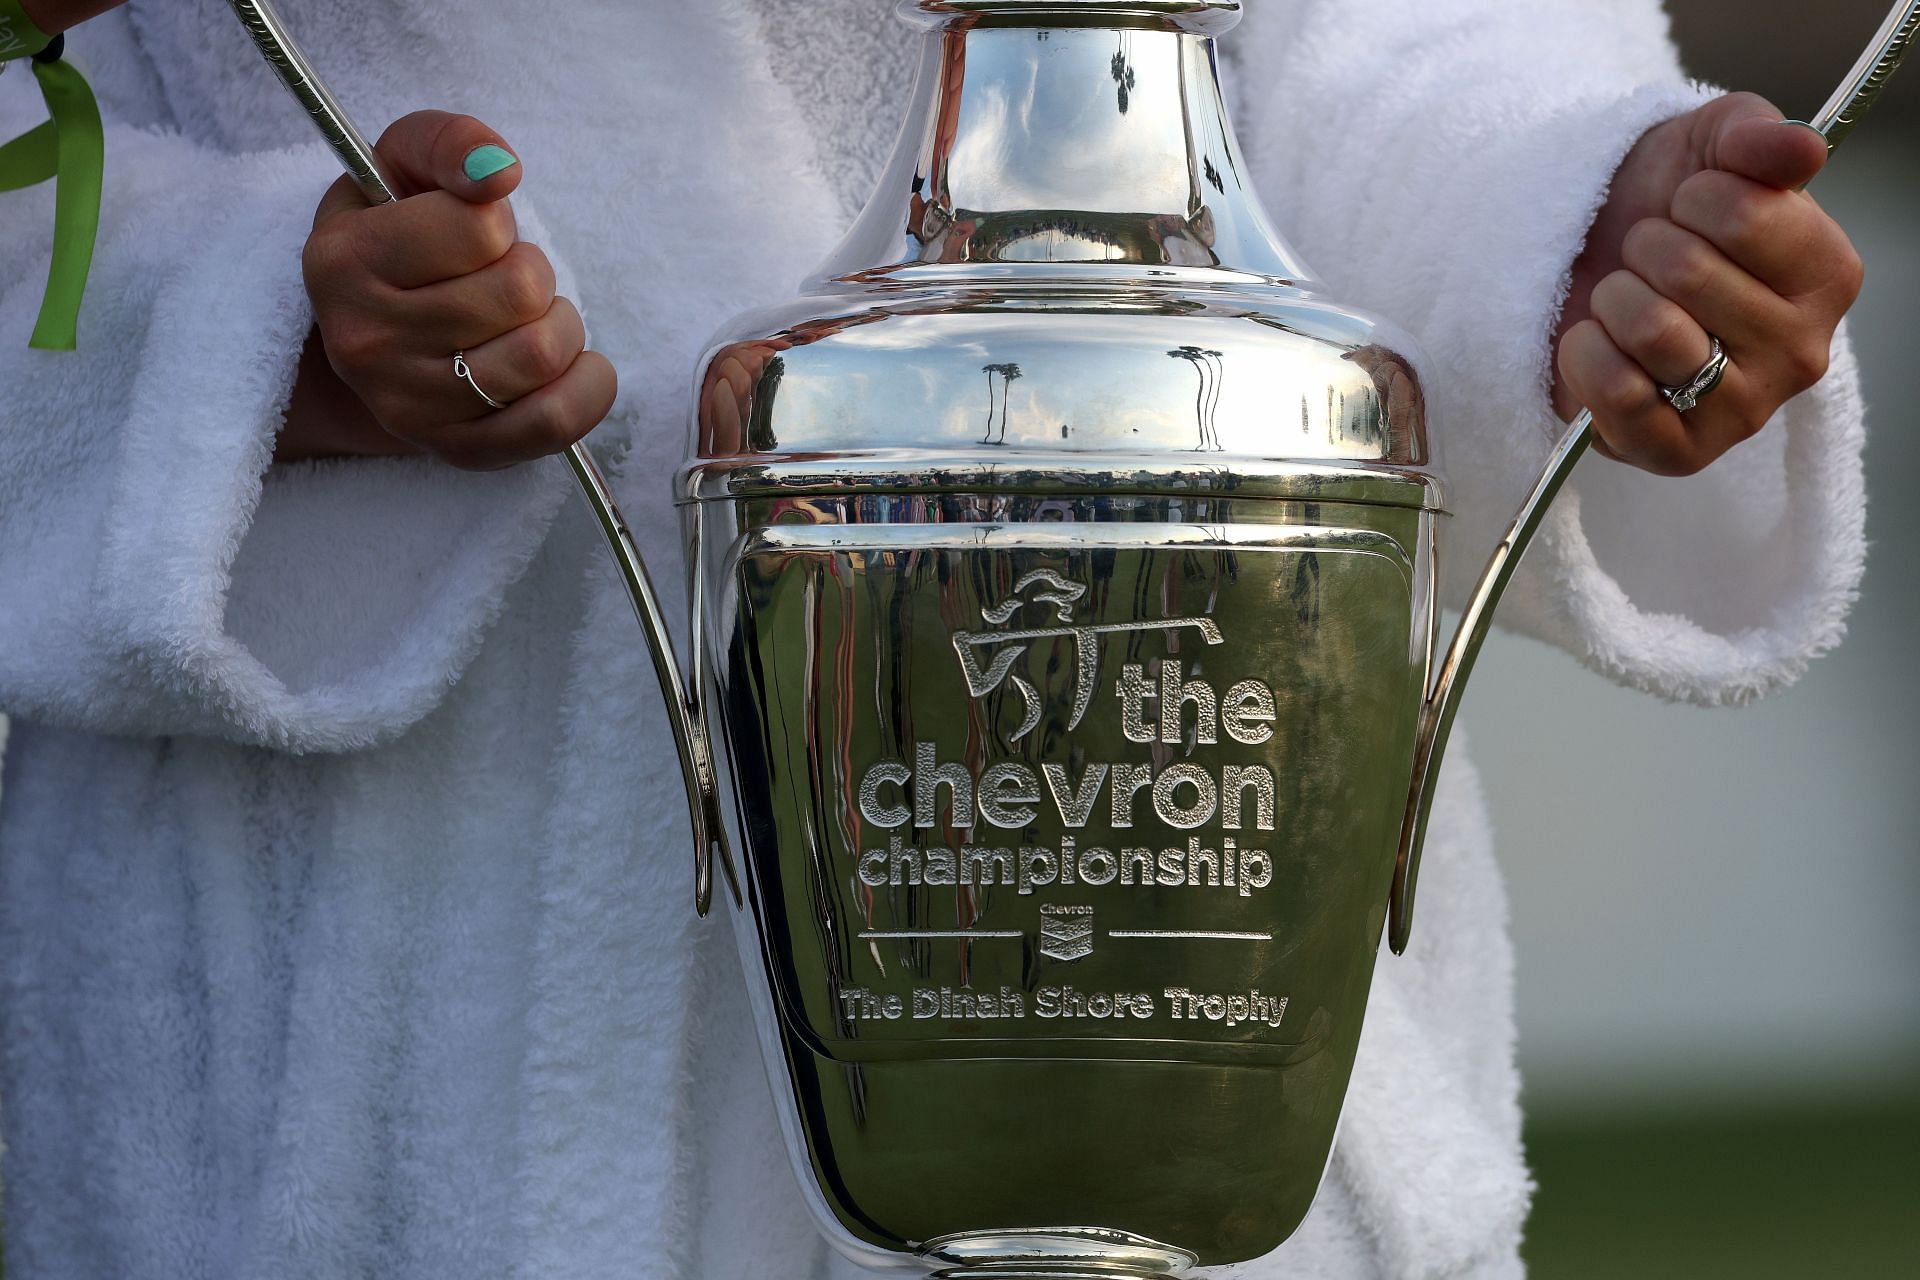 LPGA's The Chevron Championship Schedule, players, prize purse, and more